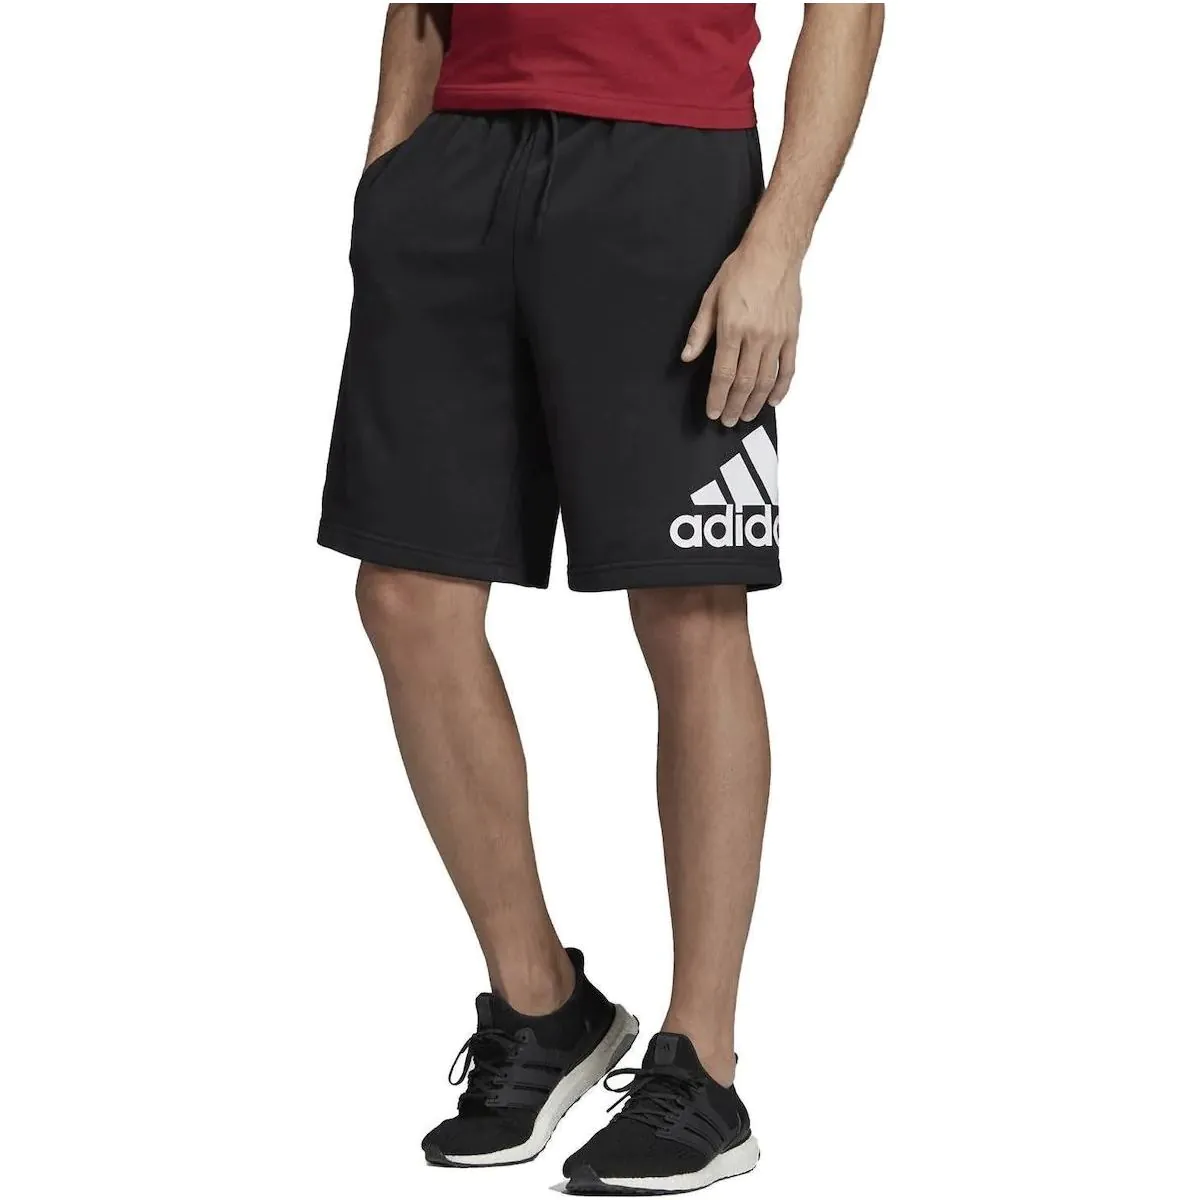 adidas Loungewear Must Haves Badge Of Sport Men's Shorts DX7